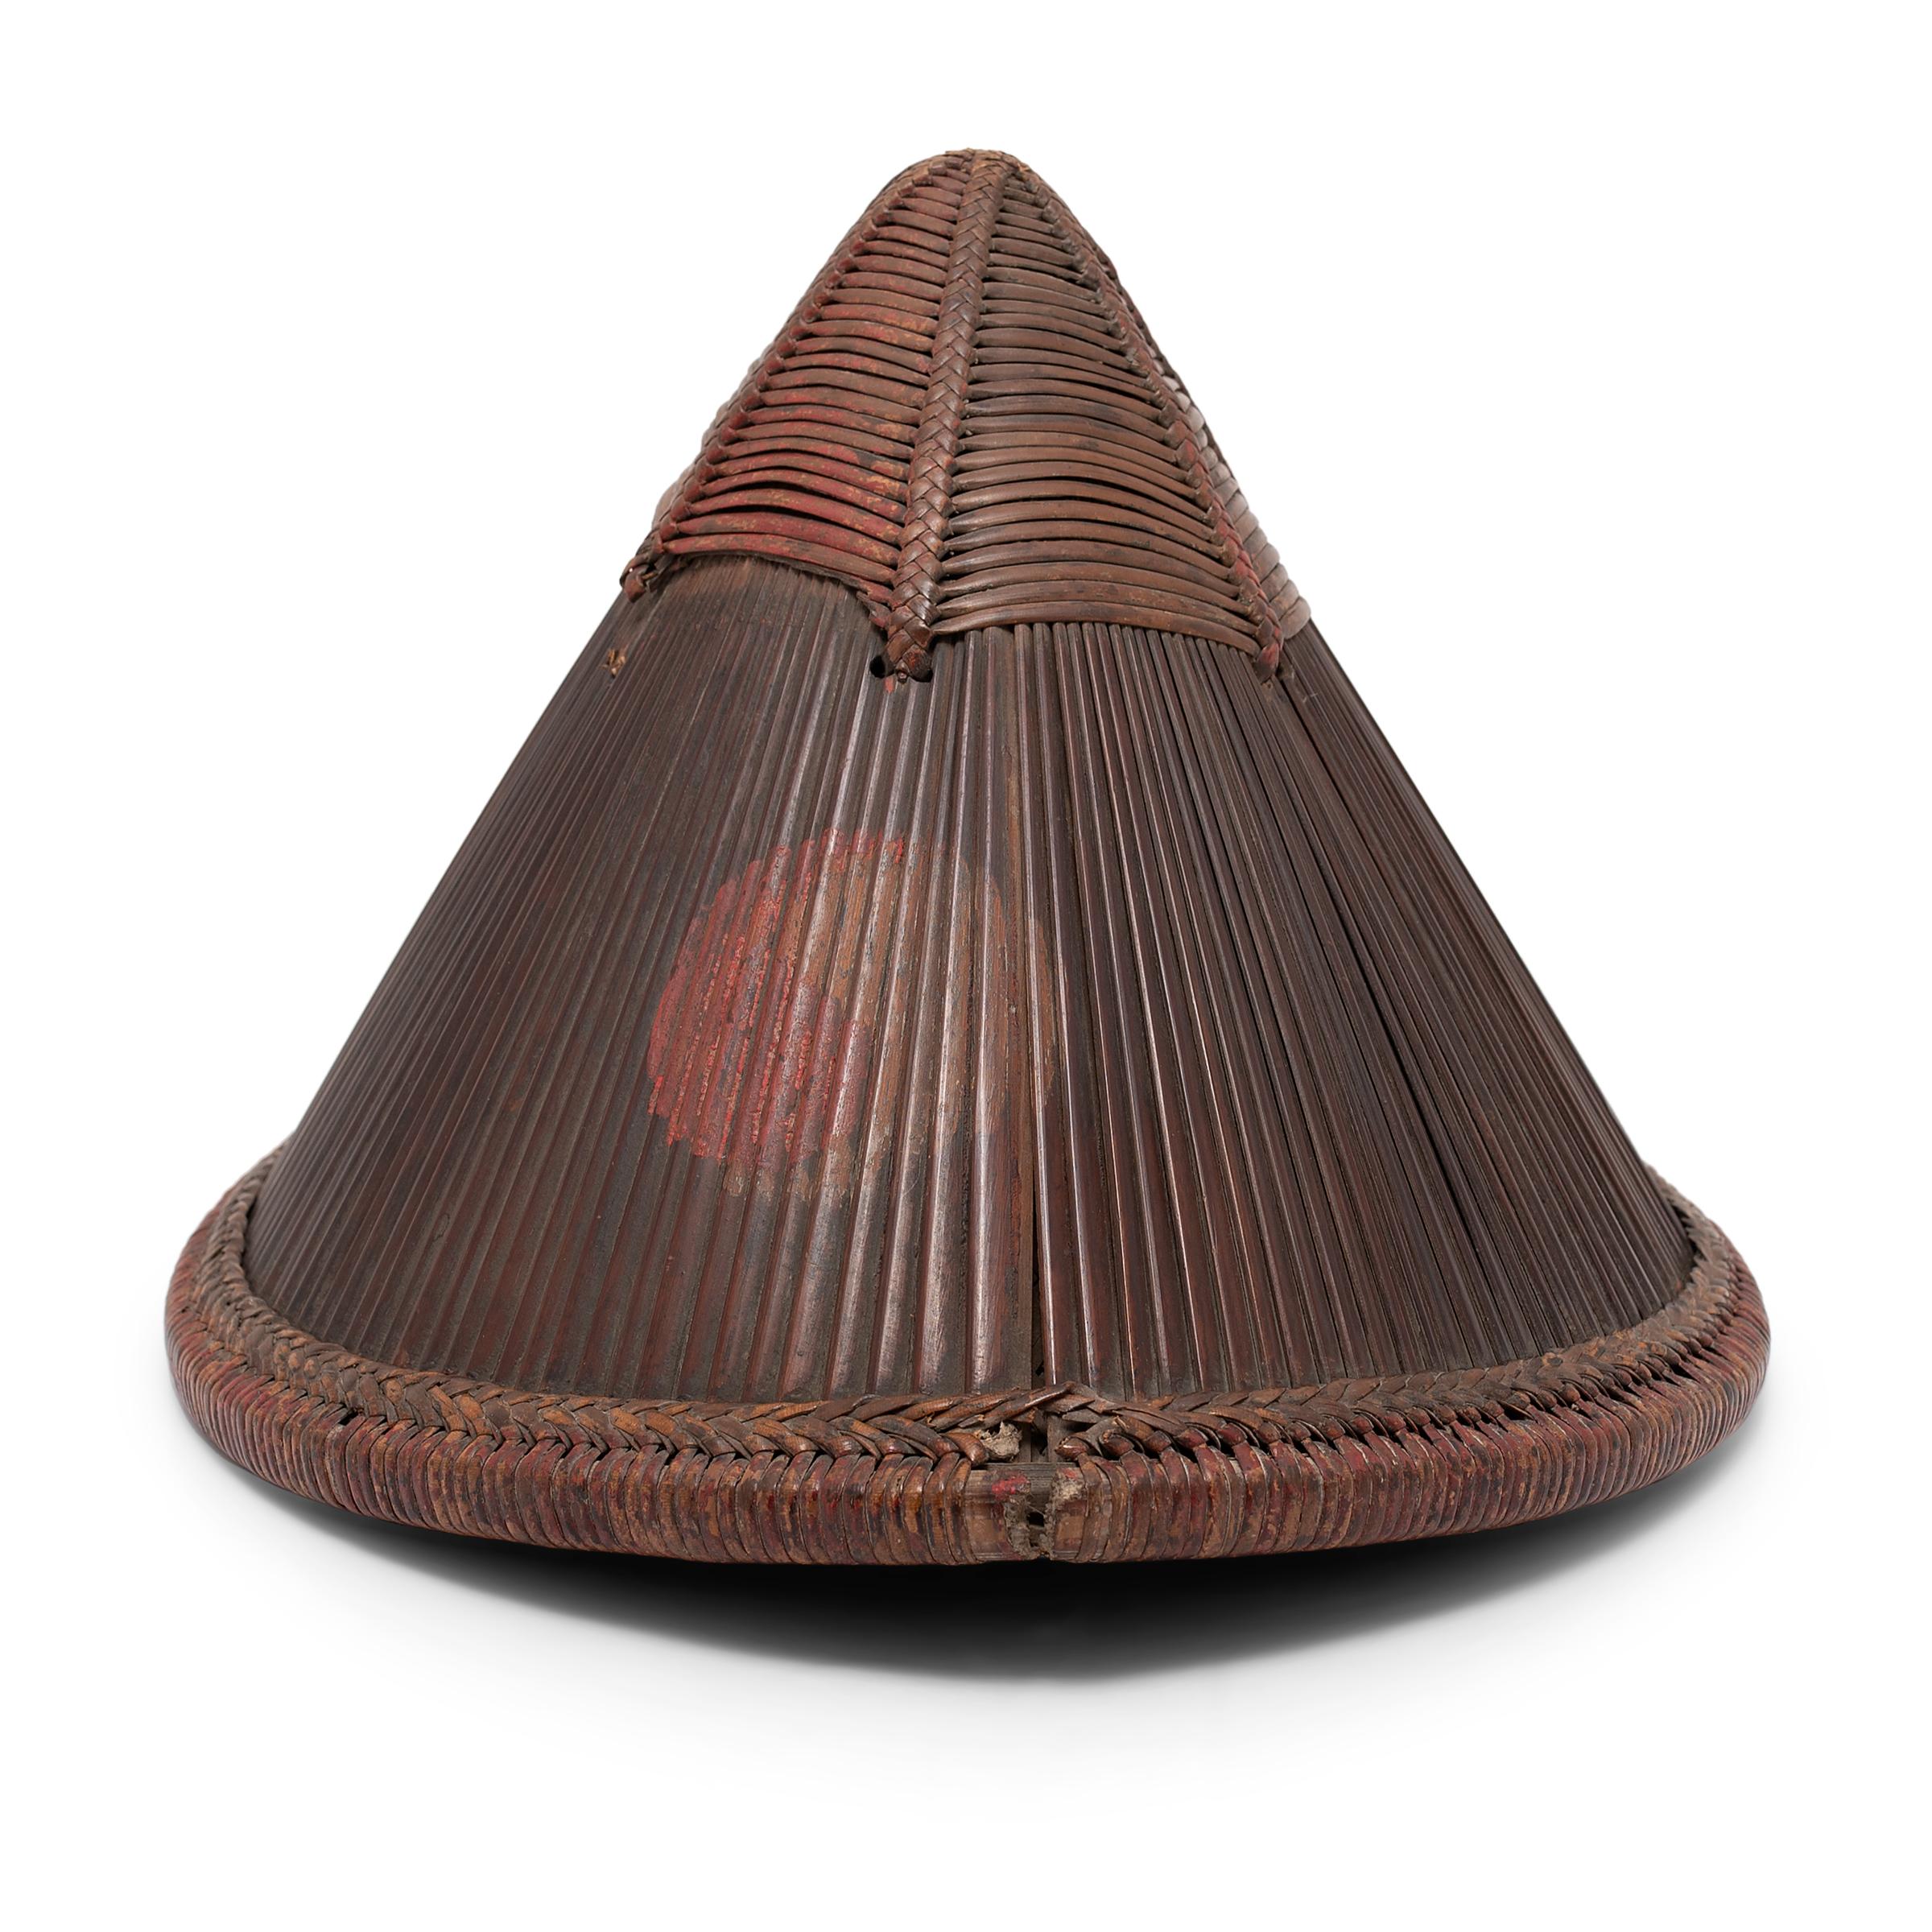 This conical woven hat originates from 19th century China and is expertly crafted entirely of bamboo. The outside consists of slivers of bamboo woven together with rattan strips, secured by an inner lining with a rattan basket weave and a strong